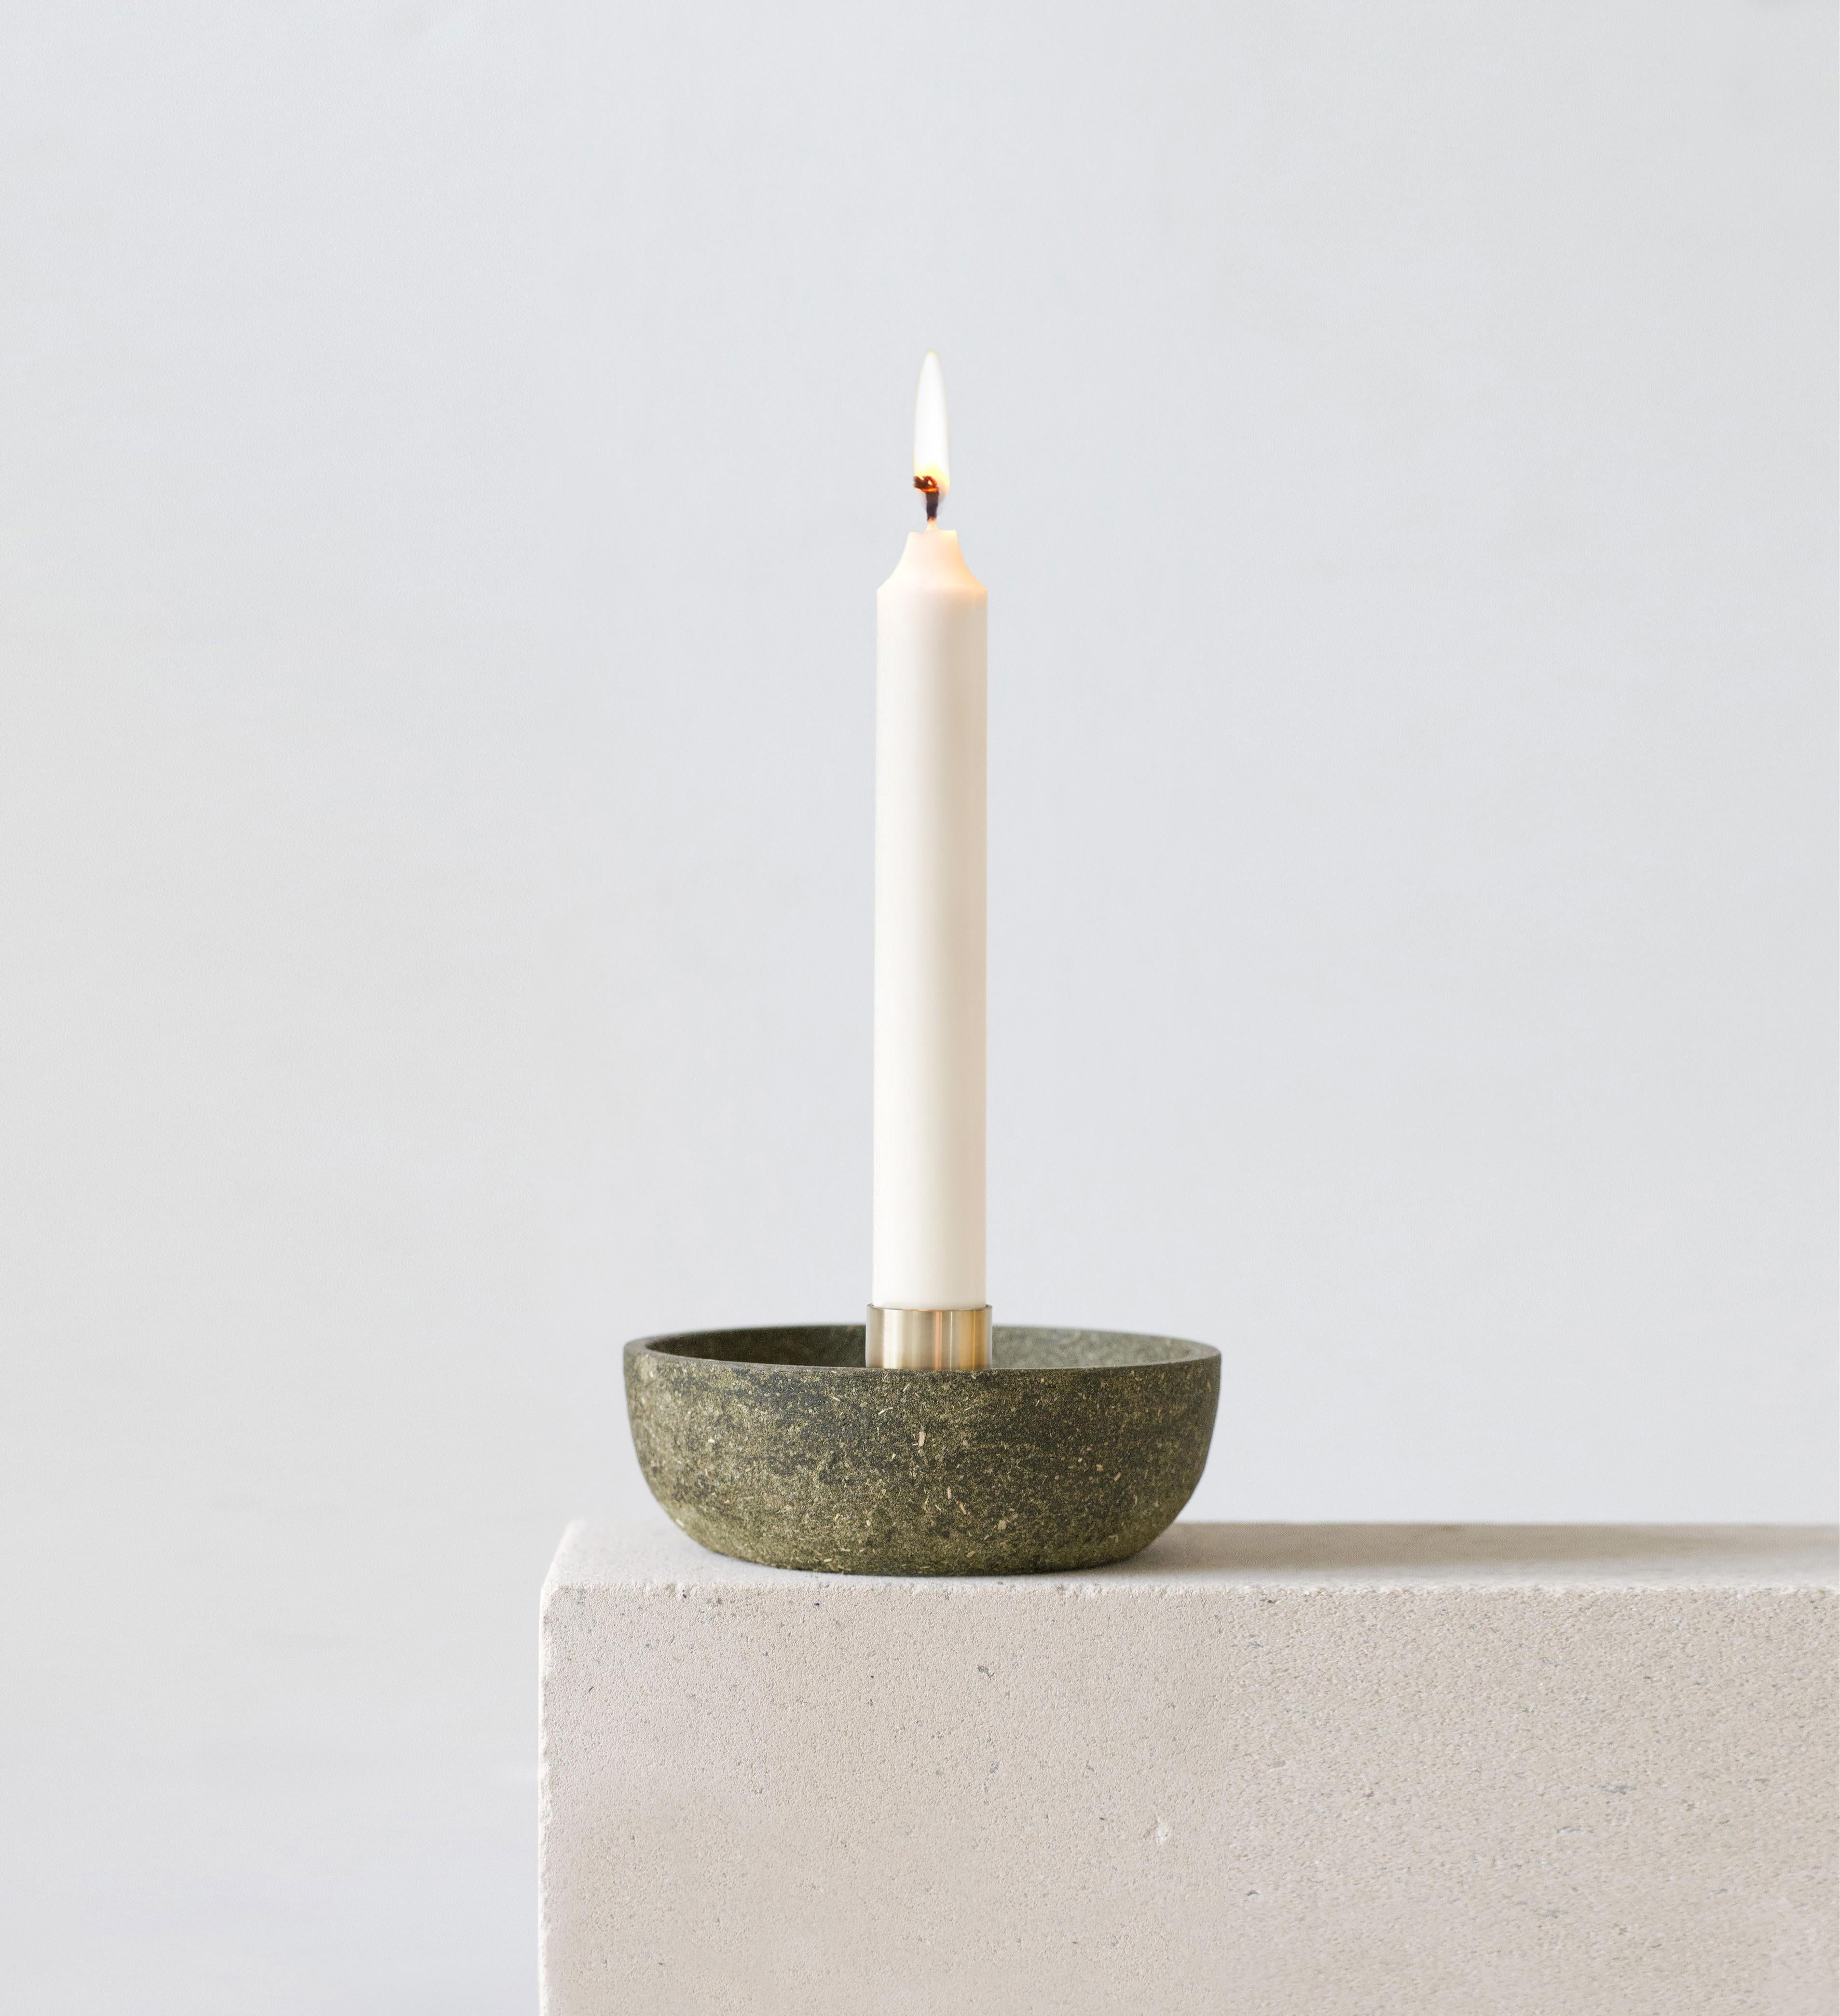 Tree leaves candlestick holder by Evelina Kudabaite Studio
Handmade
Materials: tree leaves, brass
Dimensions: H 45 mm x D 105 mm
Colour: green
Notes: for dry use

Since 2015, product designer Evelina Kudabaite keeps on developing and making